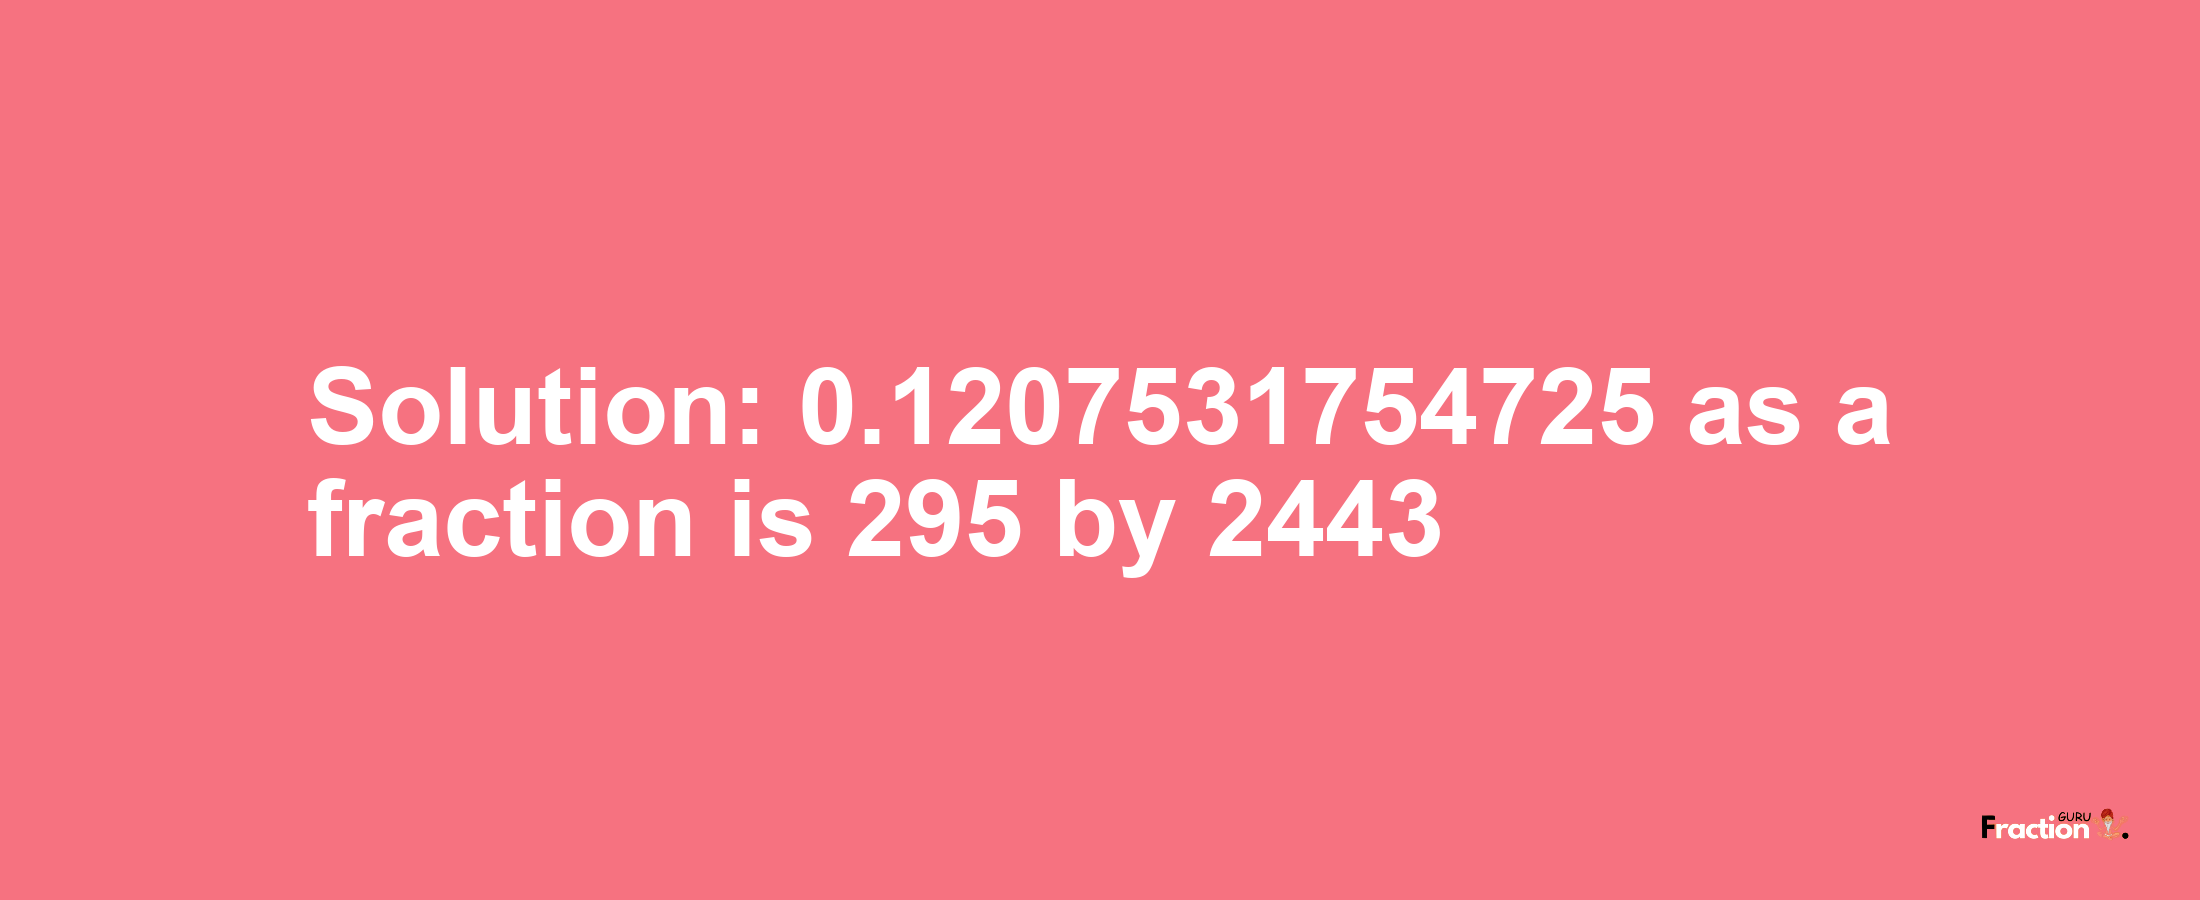 Solution:0.1207531754725 as a fraction is 295/2443